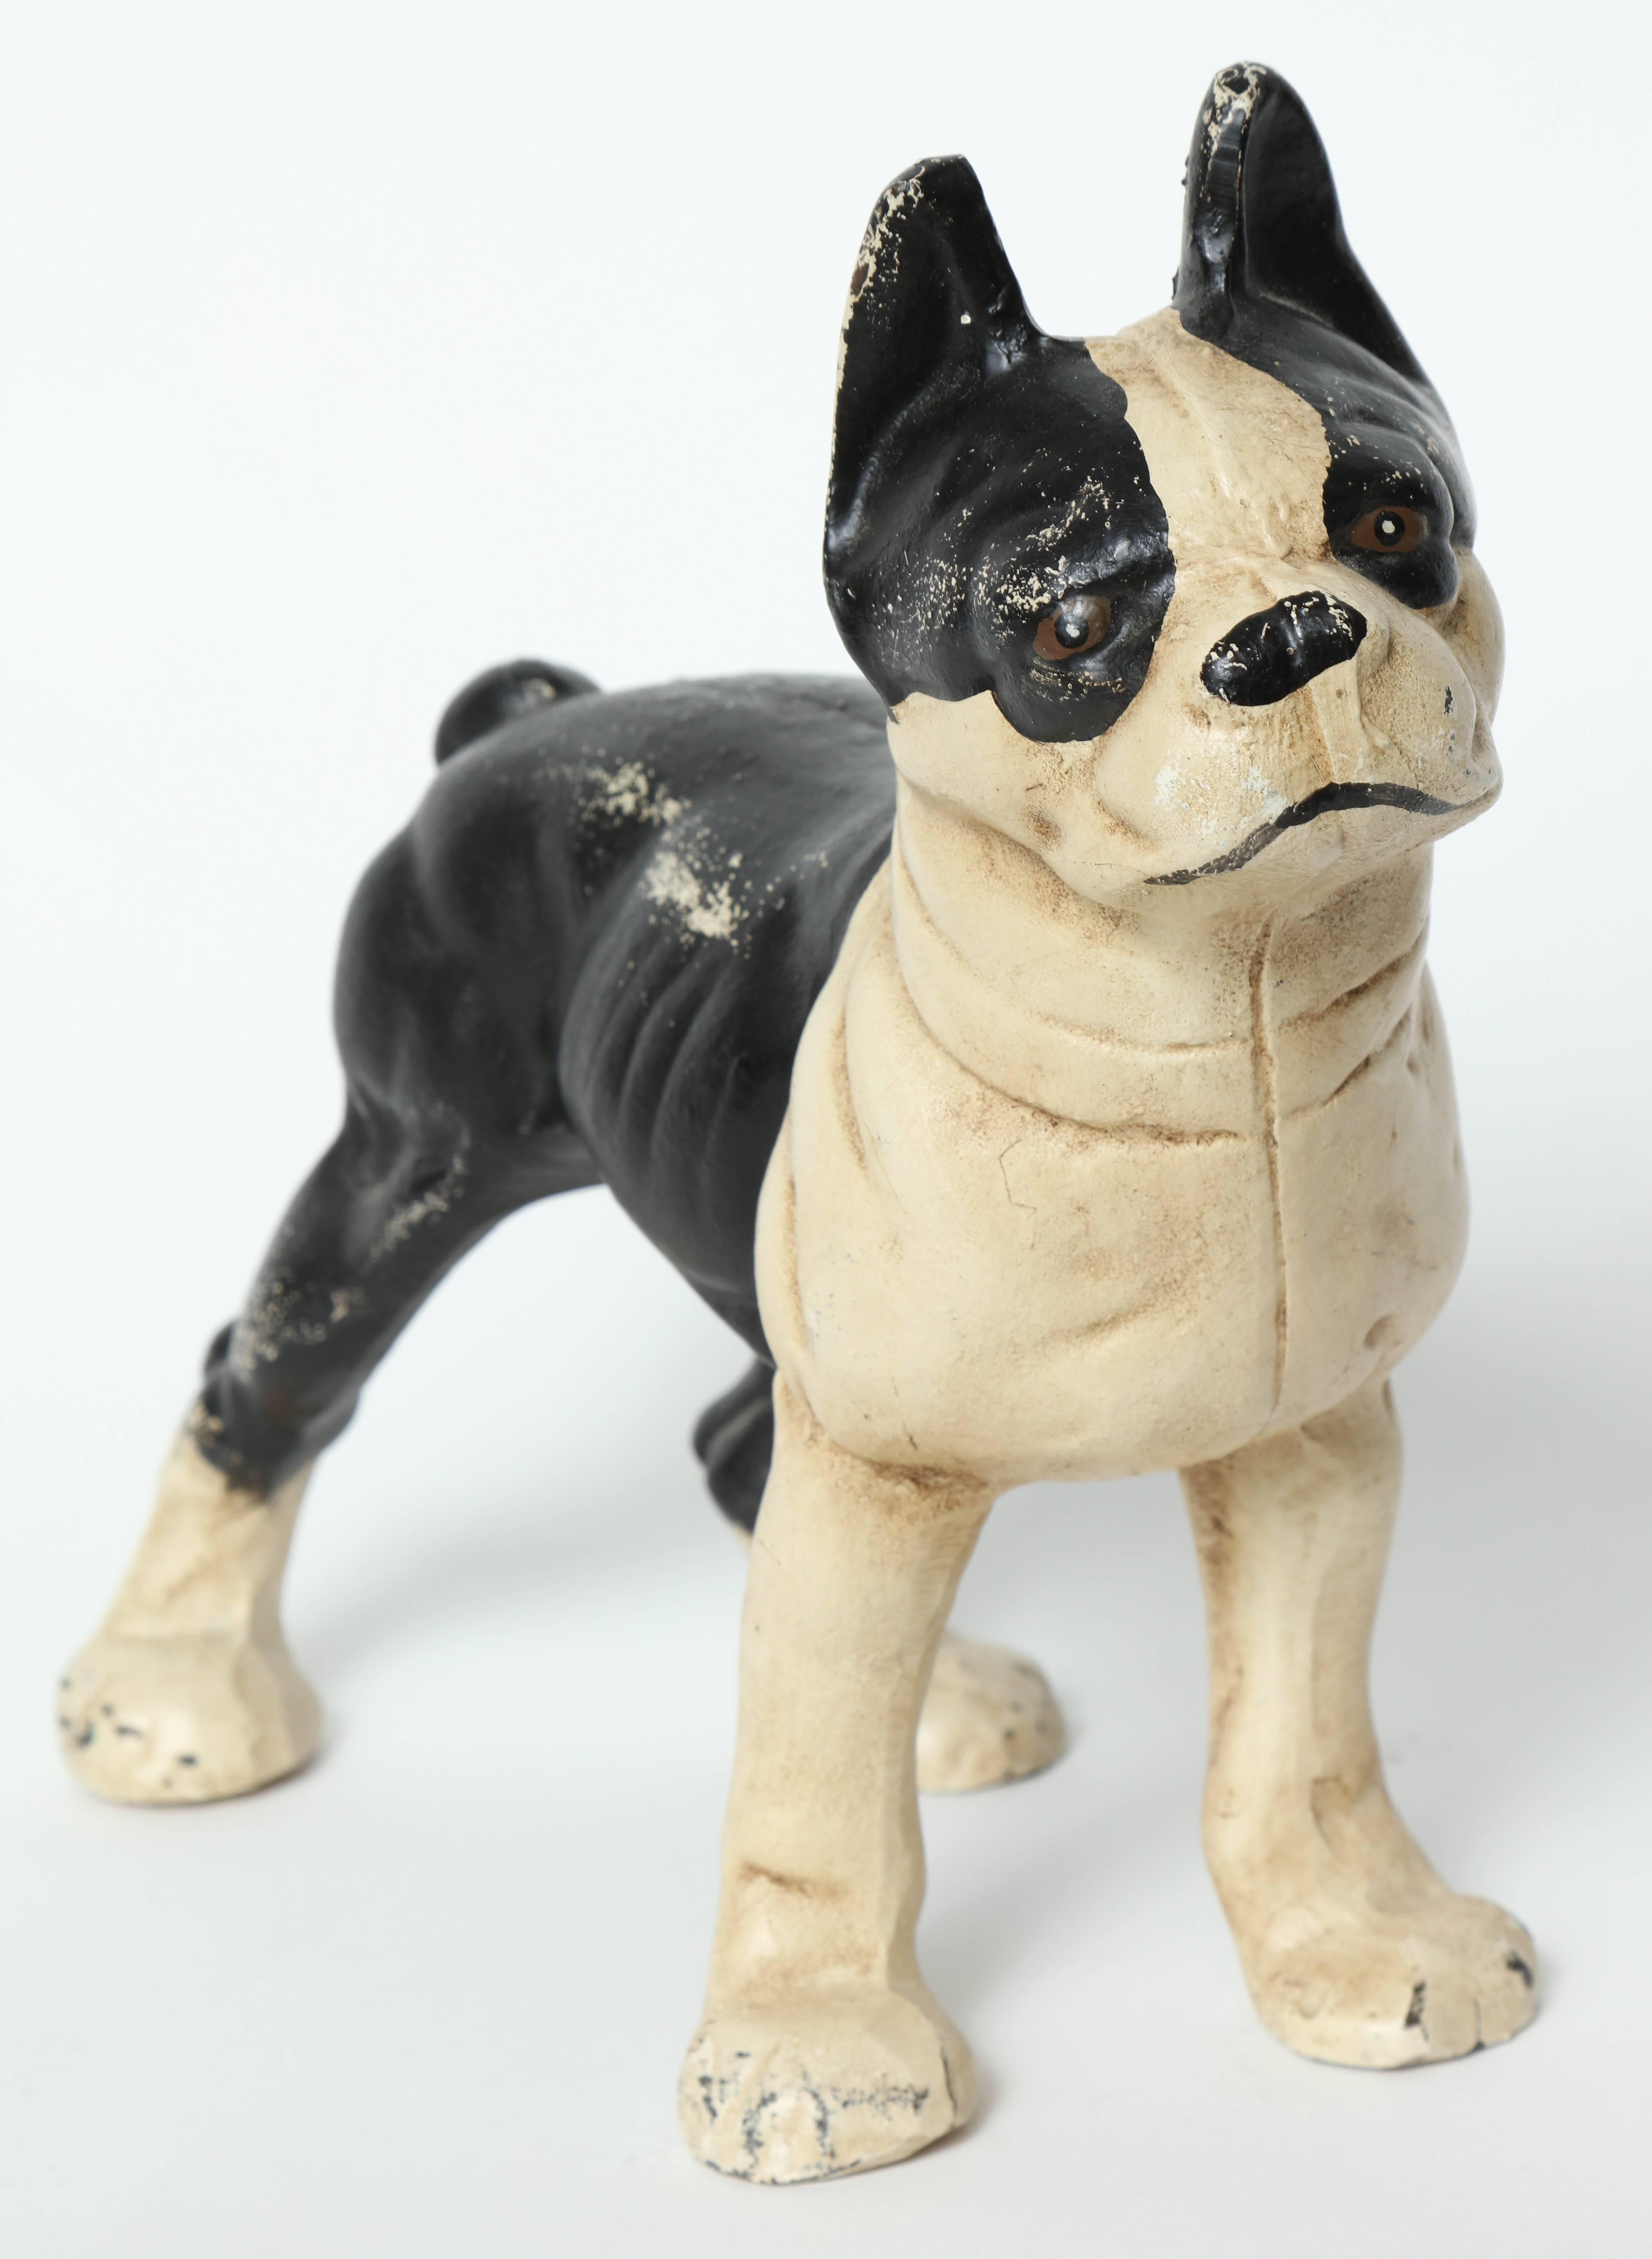 American 1940s hand-painted solid cast iron Boston Terrier door stop with fantastic facial details. Minimal signs of age.